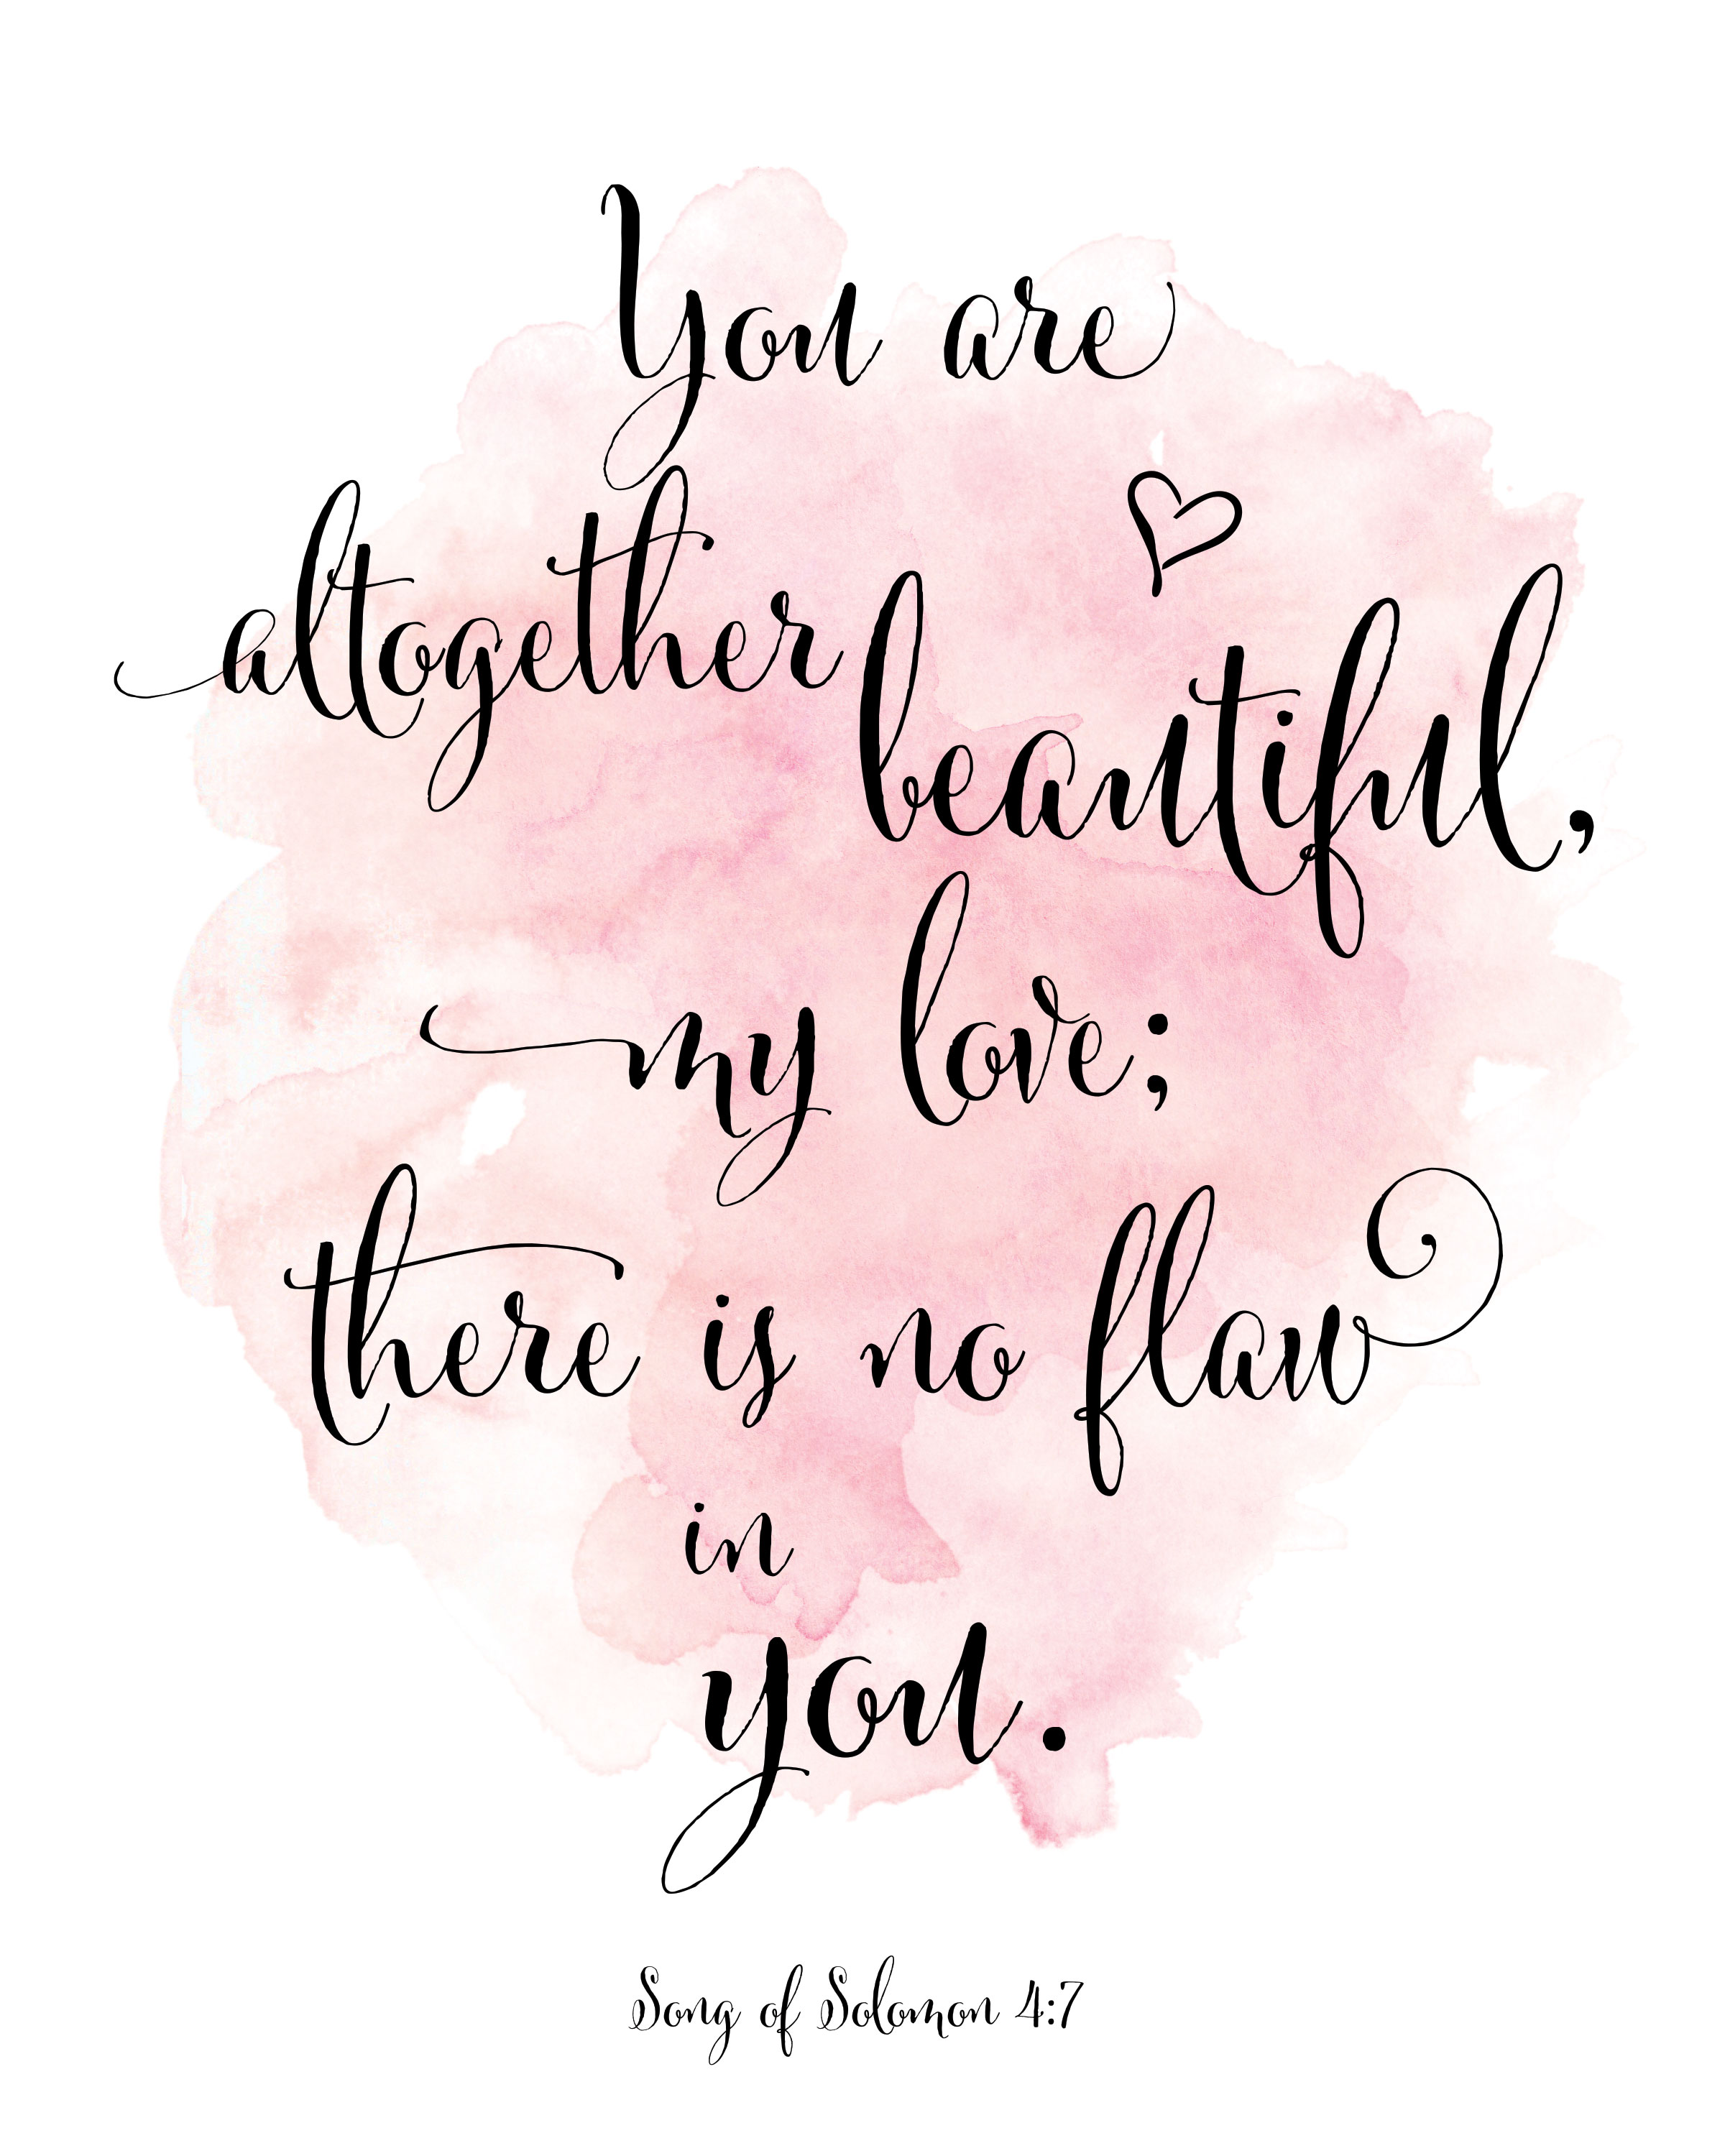 Song of Solomon Free Printable - Heart. Soul. Strength. Mind.